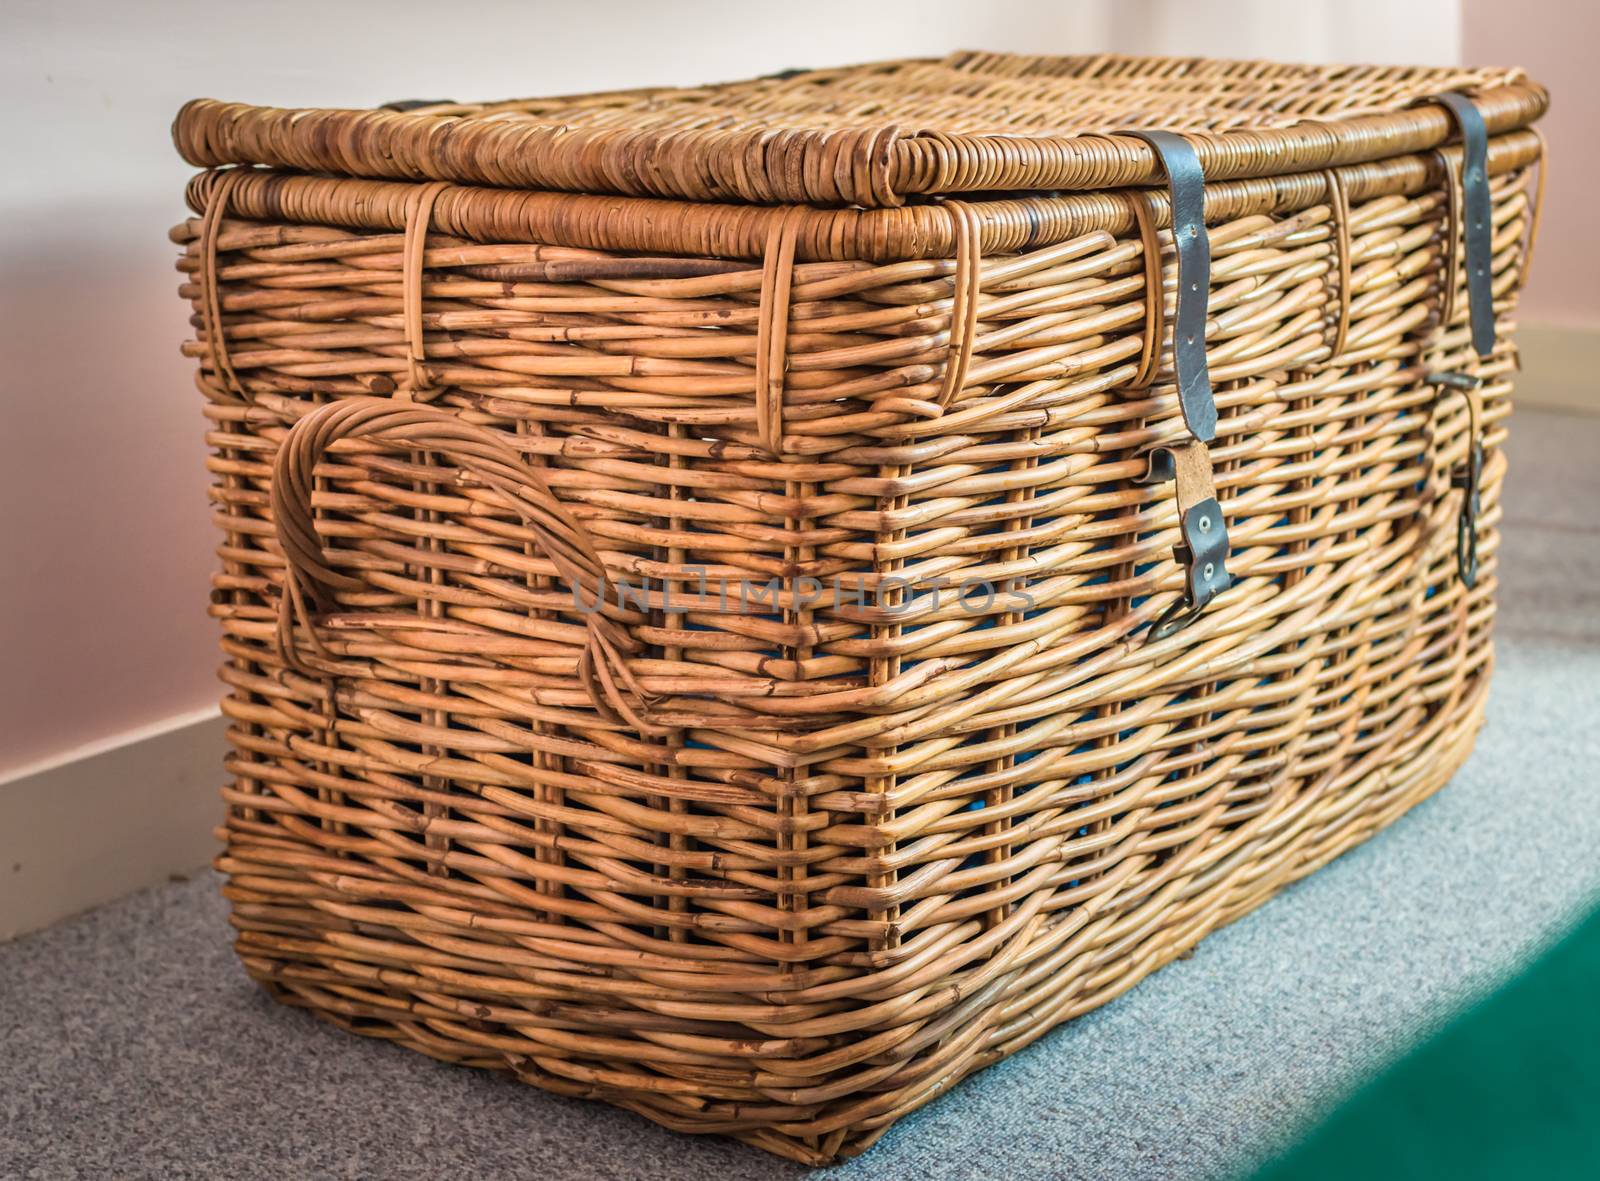 Wicker basket on the background in the room